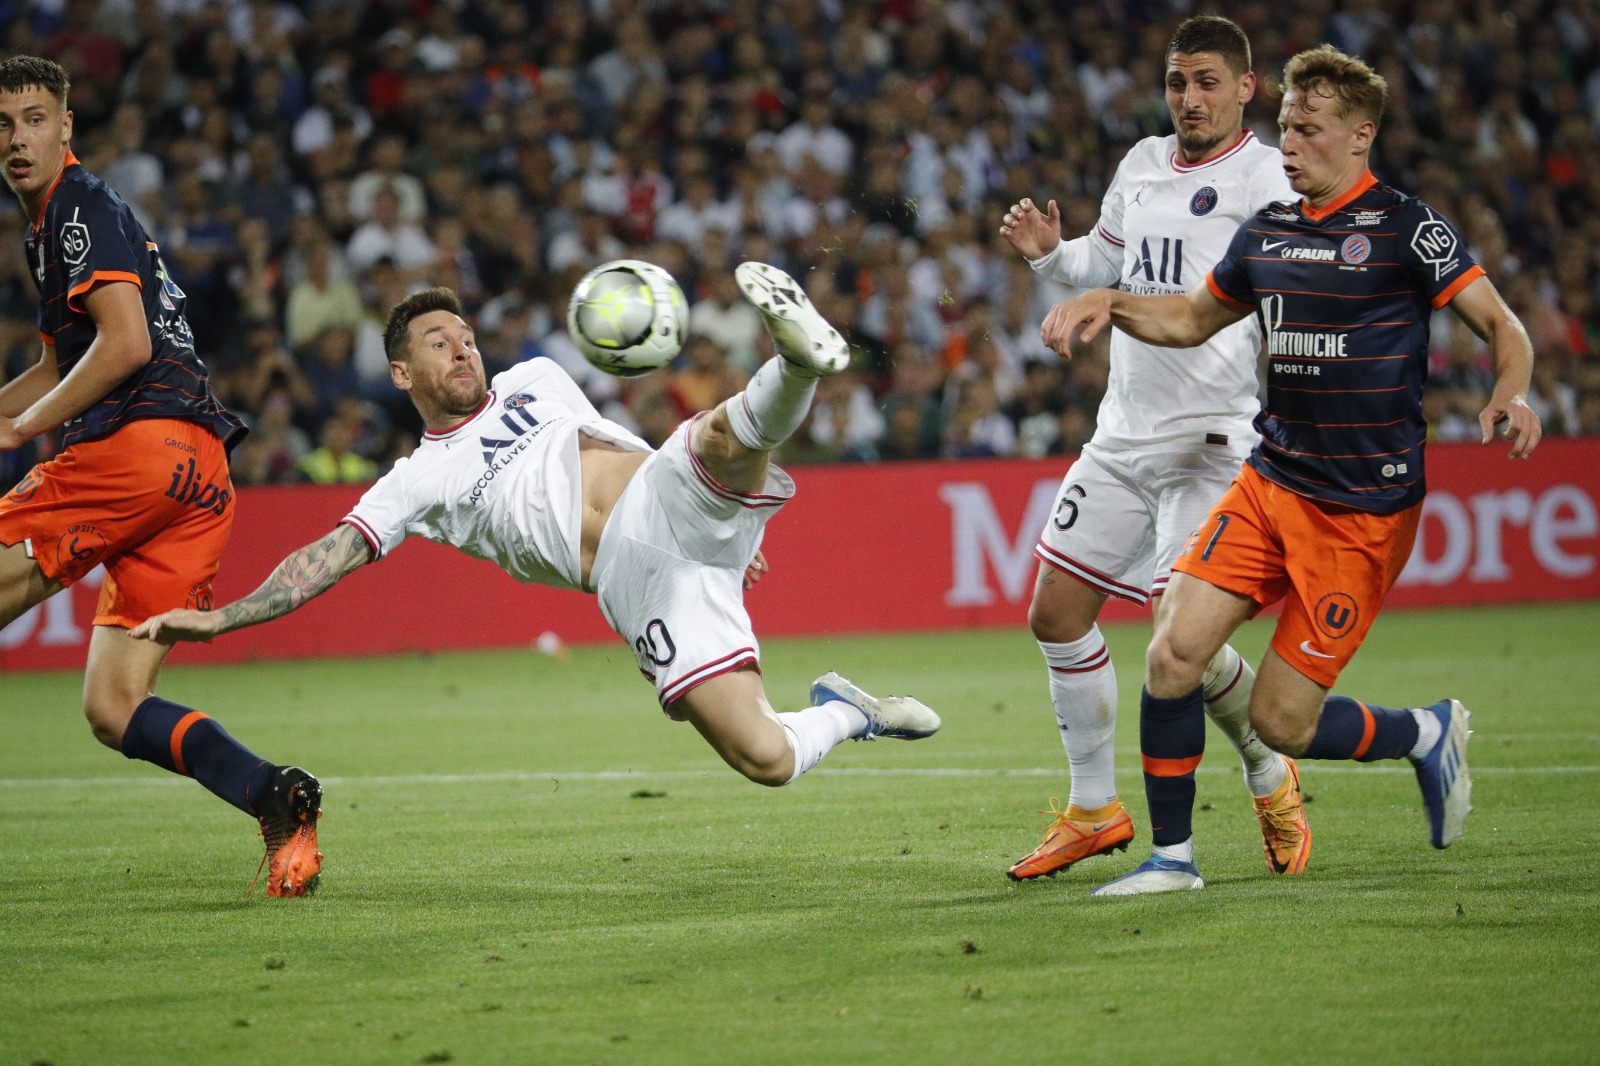 Ligue 1: PSG beat Montpellier 4-0 with goals from Lionel Messi, Kylian Mbappe and Di Maria, Watch Paris Saint-Germain beat Montpellier HIGHLIGHTS